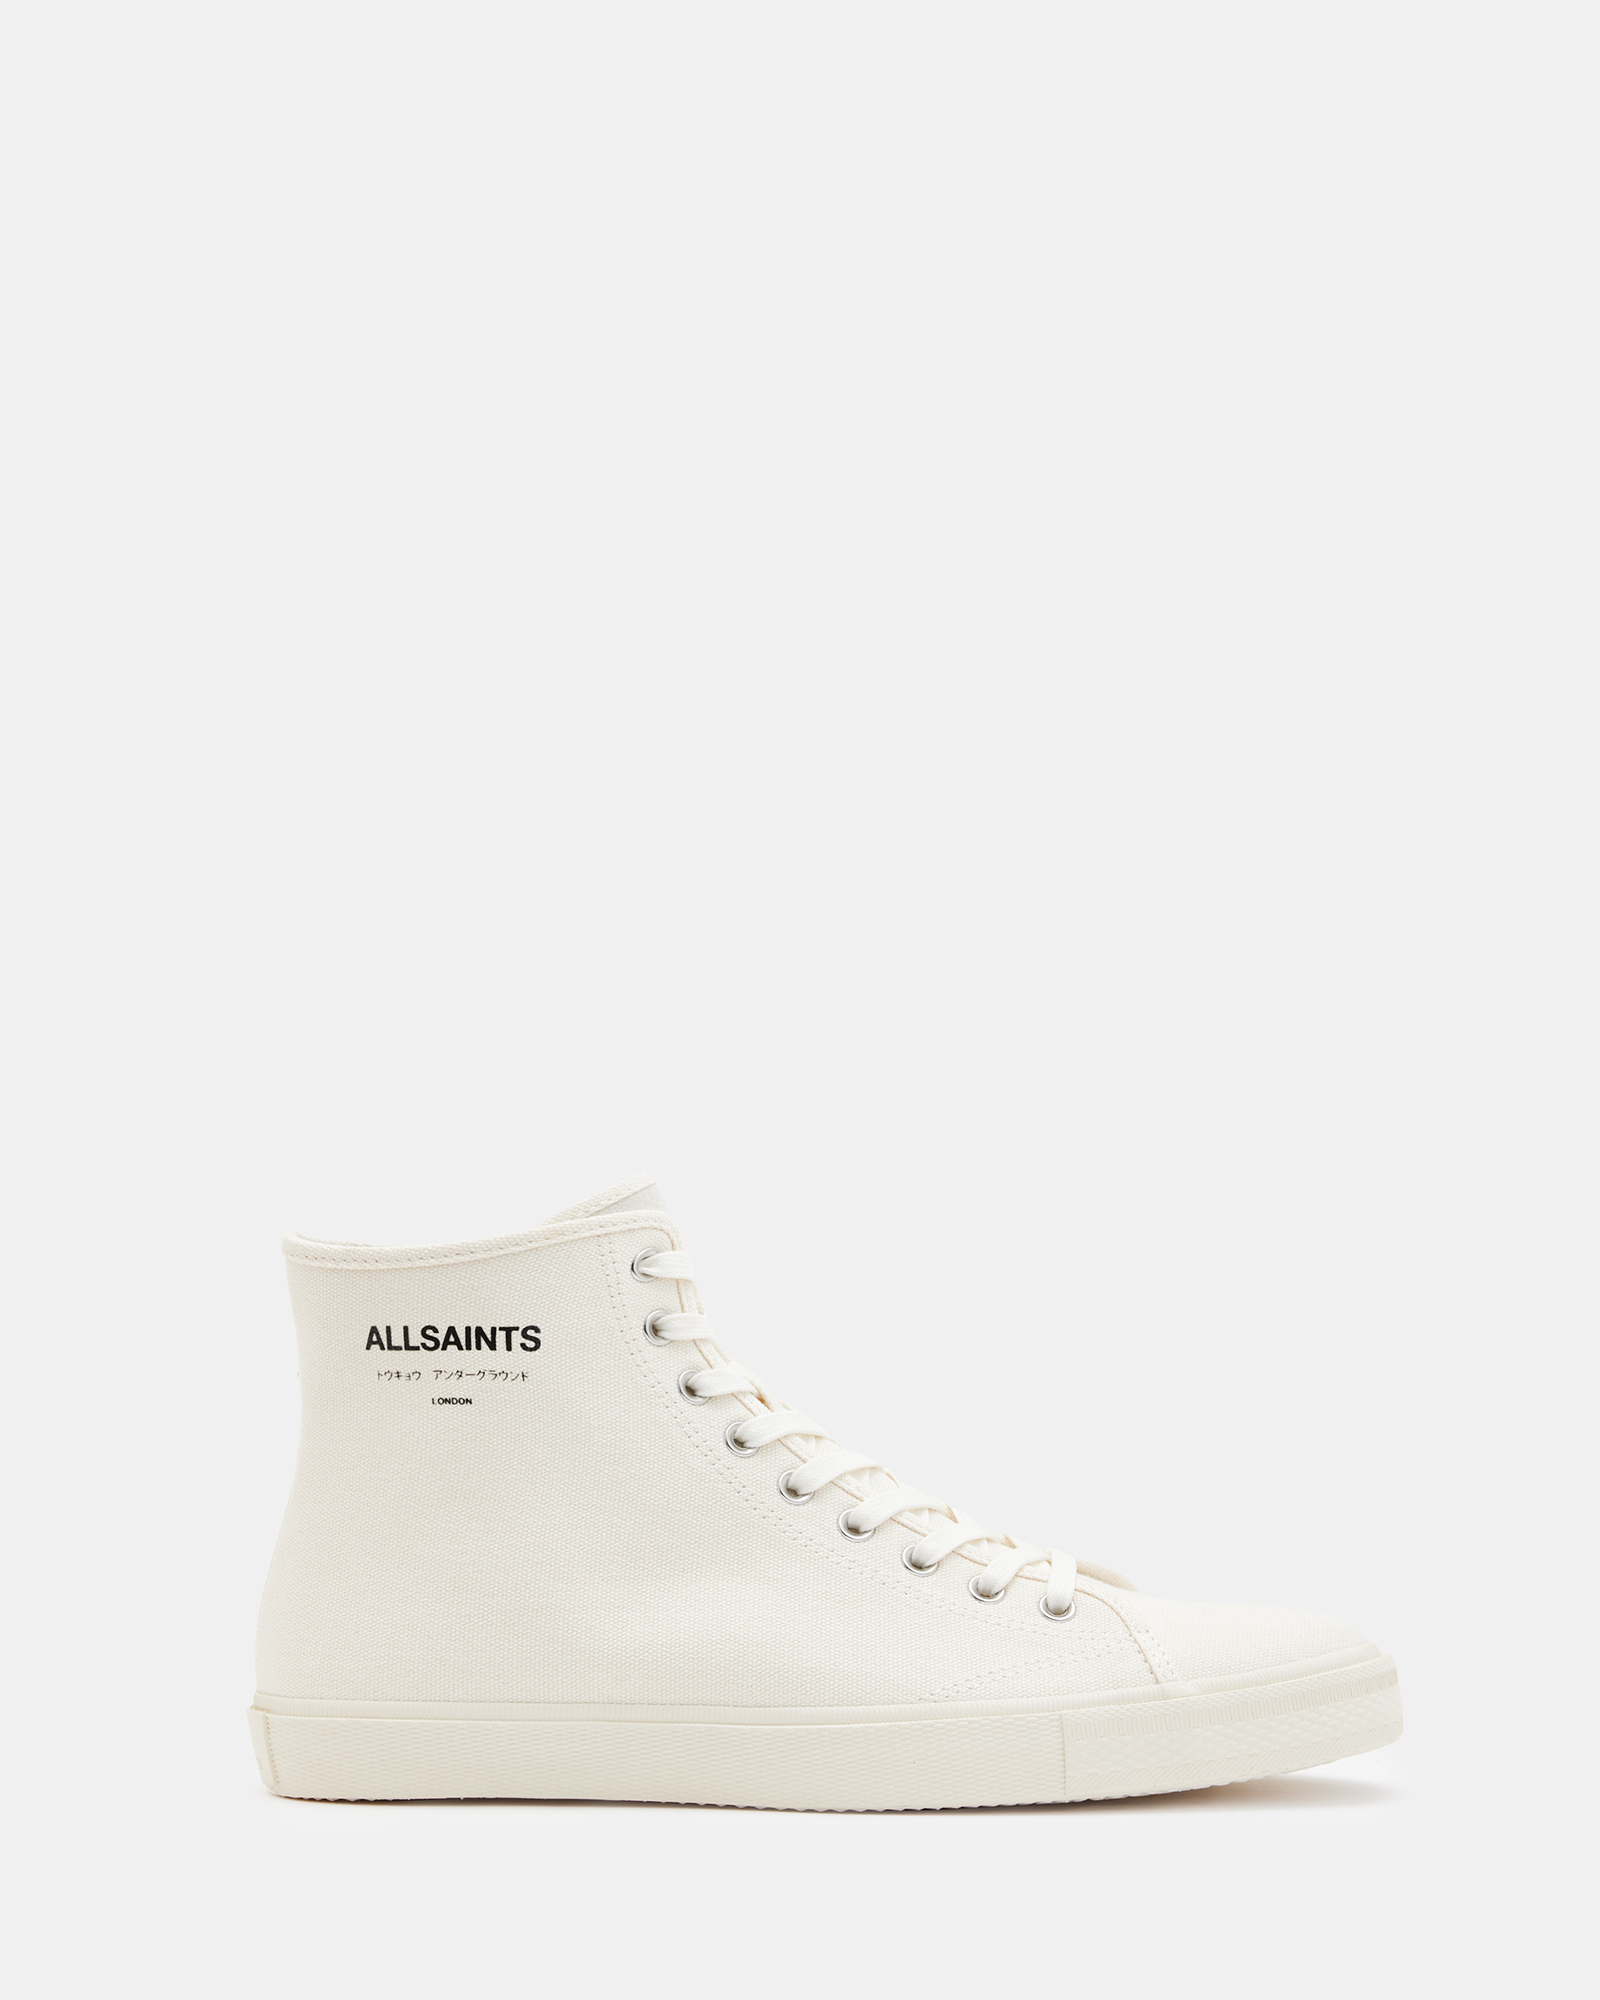 AllSaints Underground Canvas High Top Trainers,, Off White